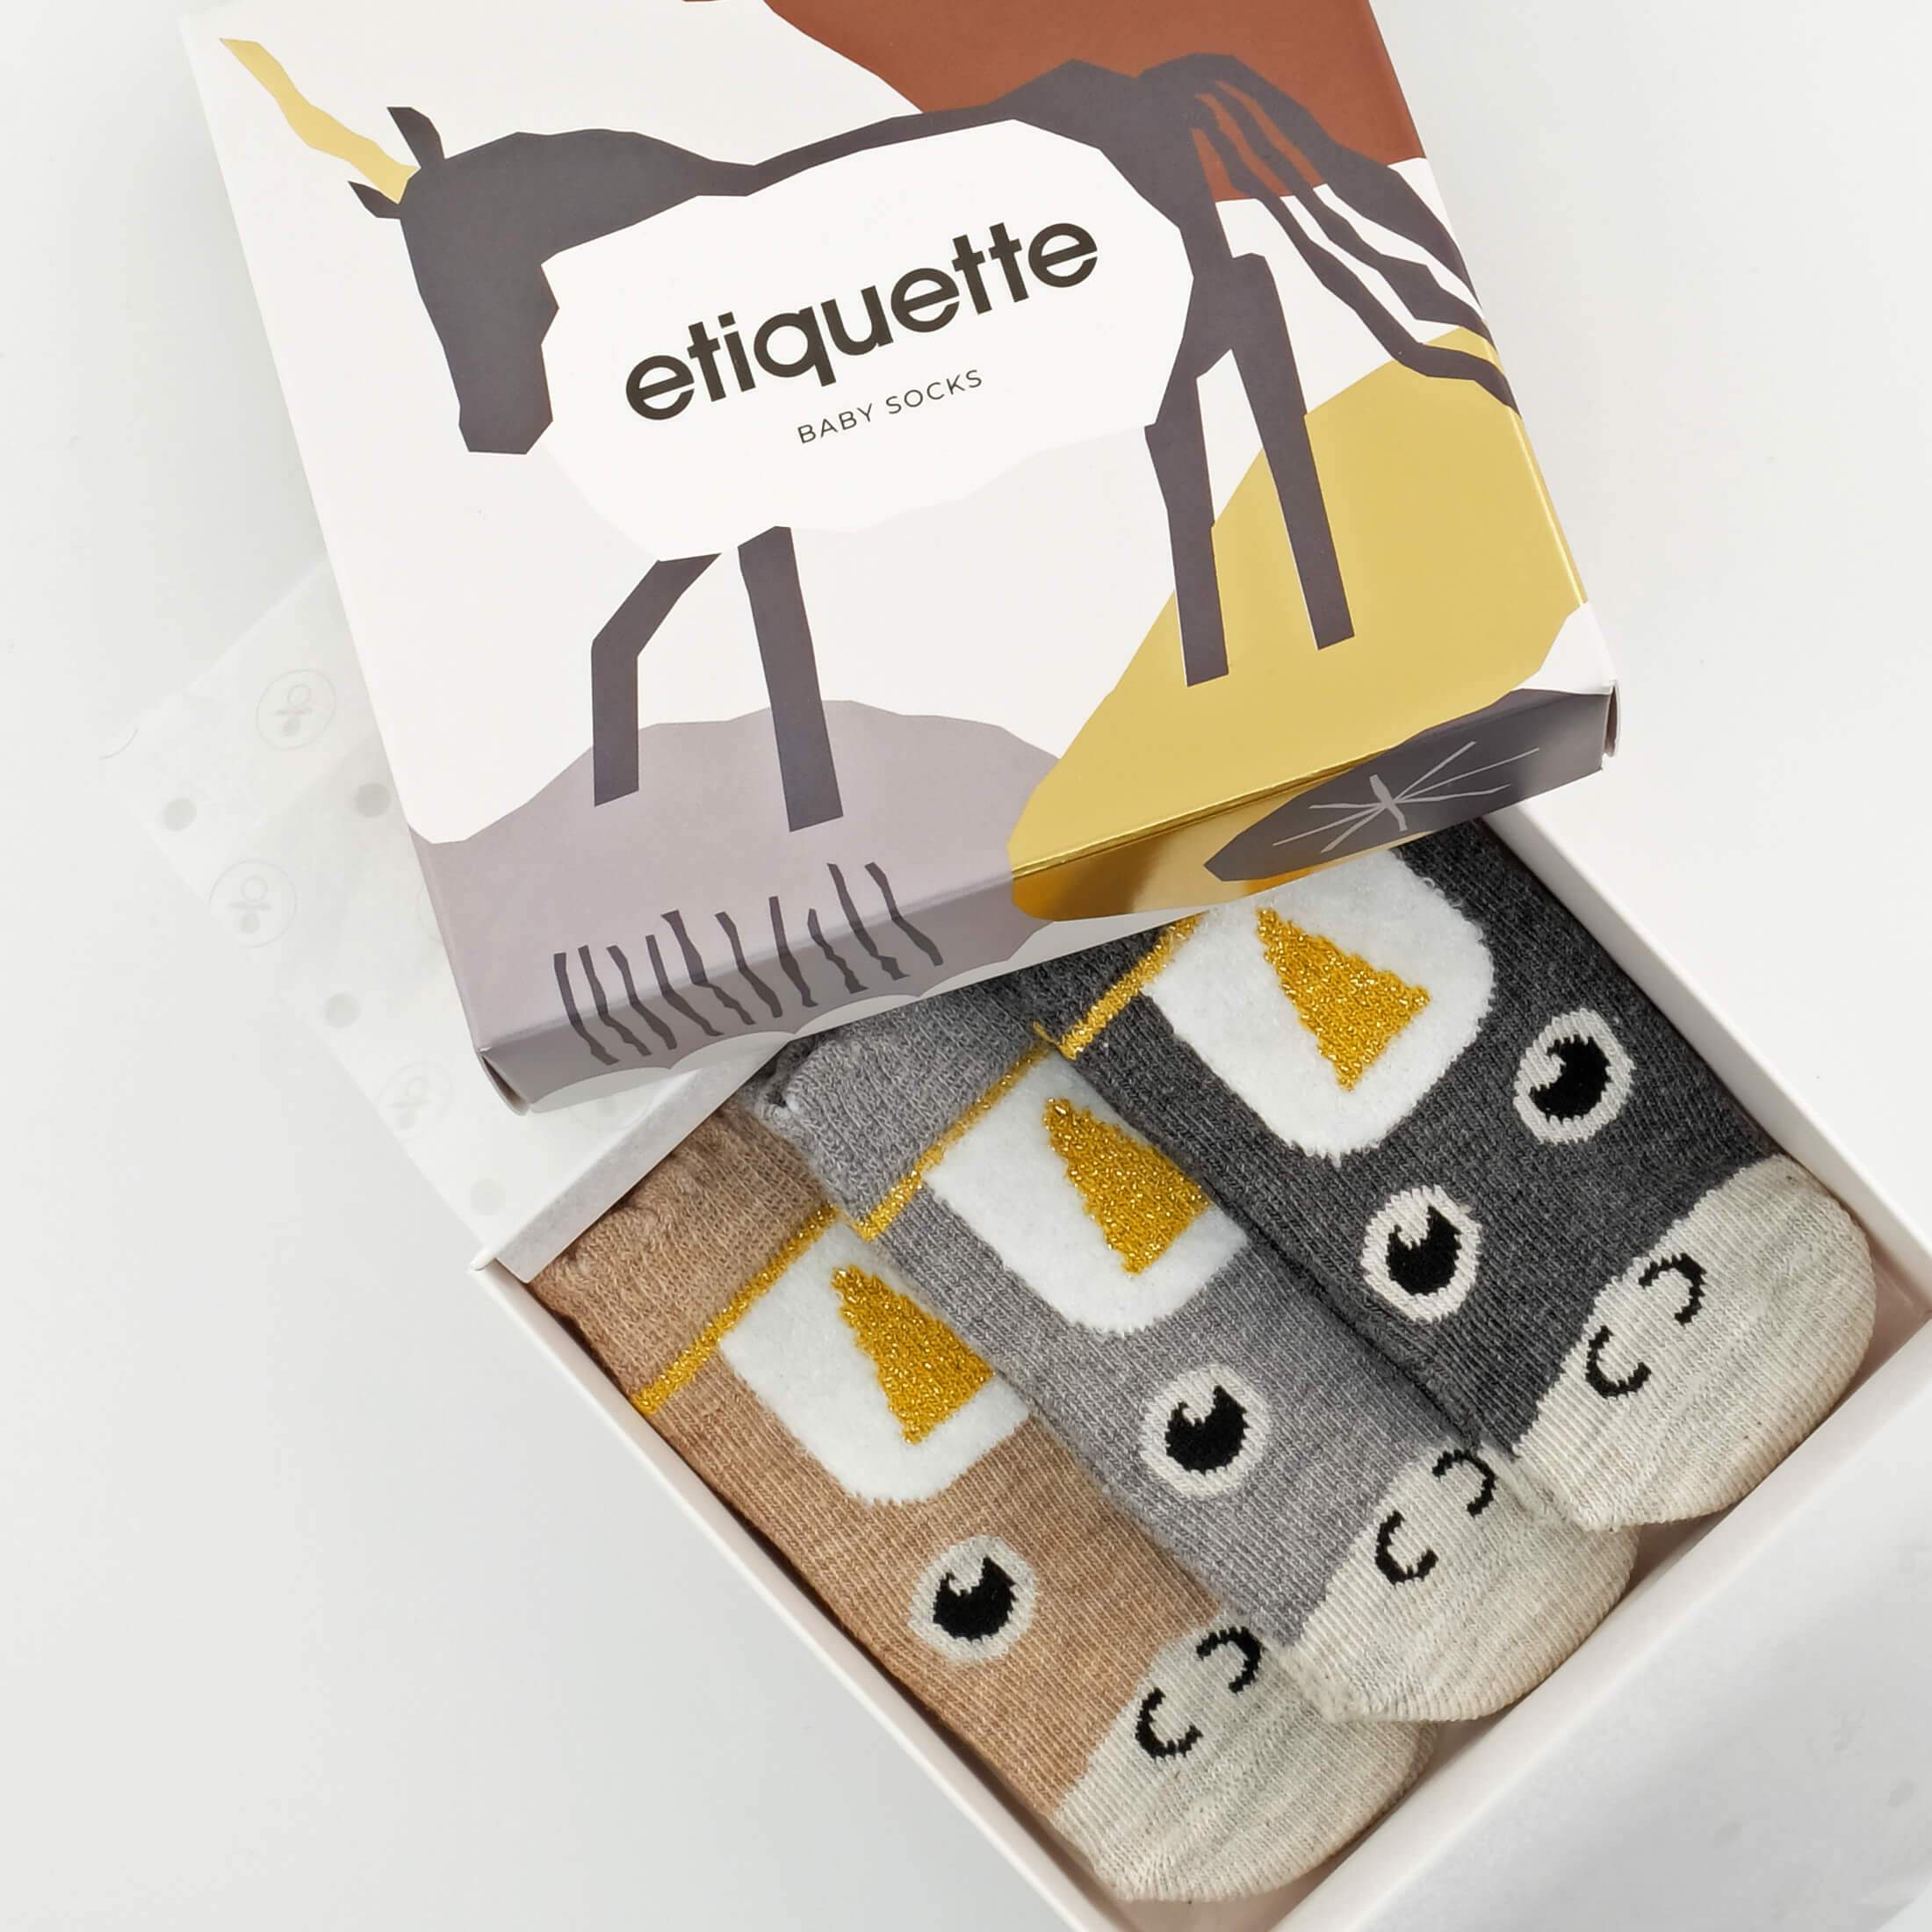 Baby Socks - Unicorn Baby Socks Gift Box - Metallics Gold and Heather Baby Socks - top box view⎪Lil'Etiquette Clothiers